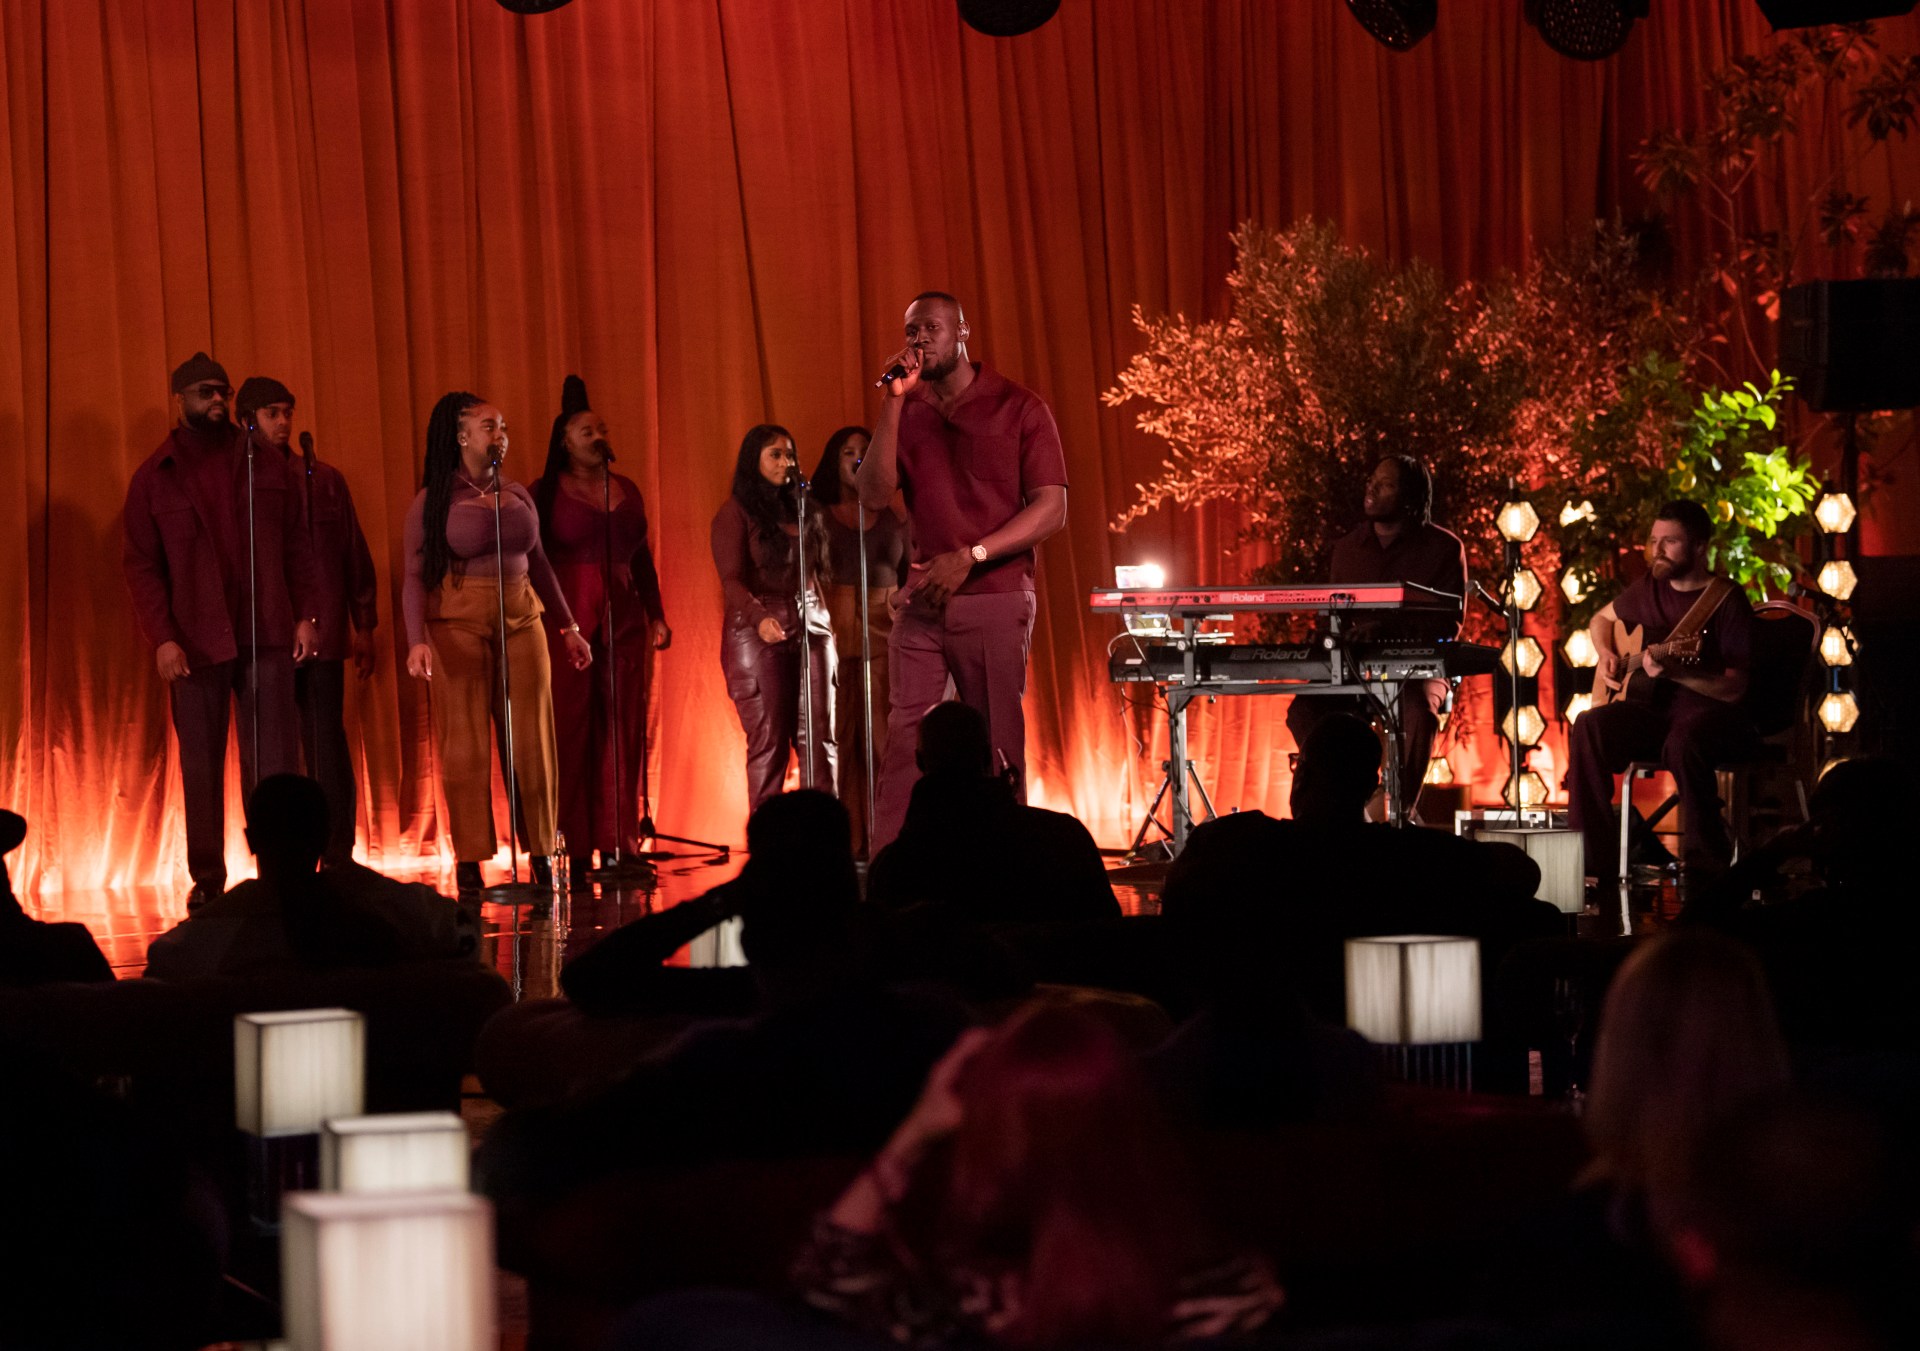 Stormzy performs Secret Hilton Concert with background singers and band at Hilton London Metropole